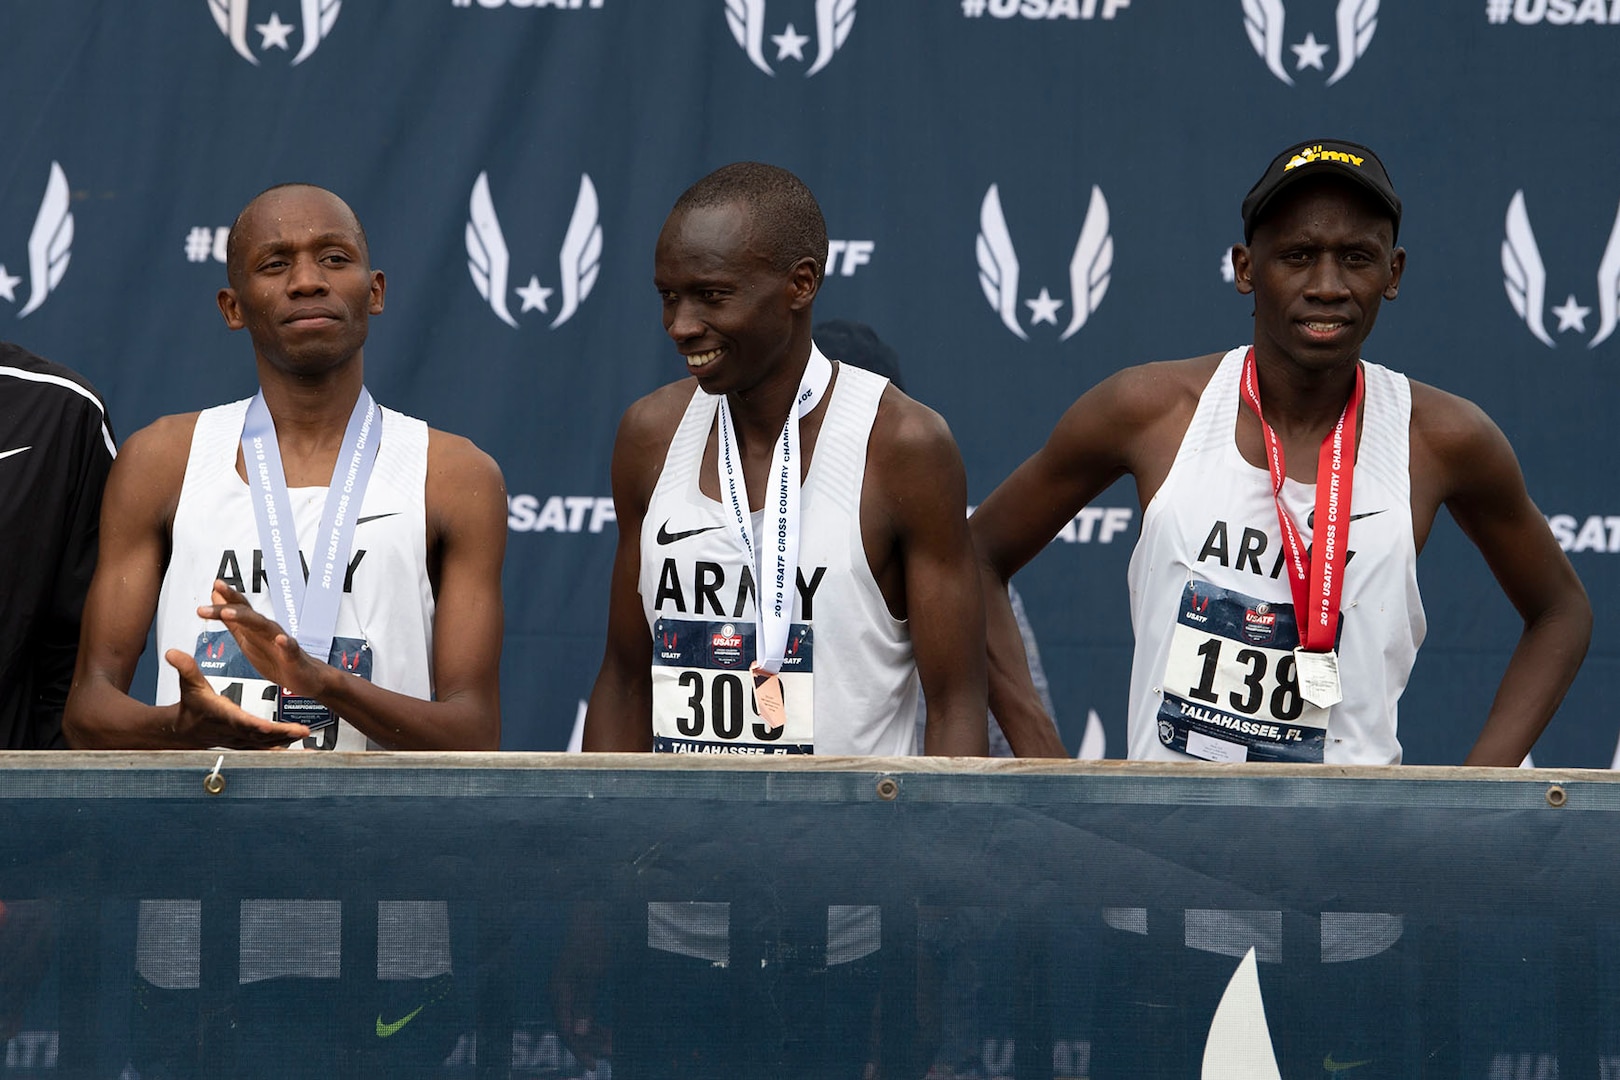 From left, Army Sgt. Hillary Bor, Army Sgt. Leonard Korir, and Army Sgt. Emmanuel Bor stand on an awards stage with their medals after placing the 2nd, 3rd, and 4th in the USA Track and Field Cross Country Championship